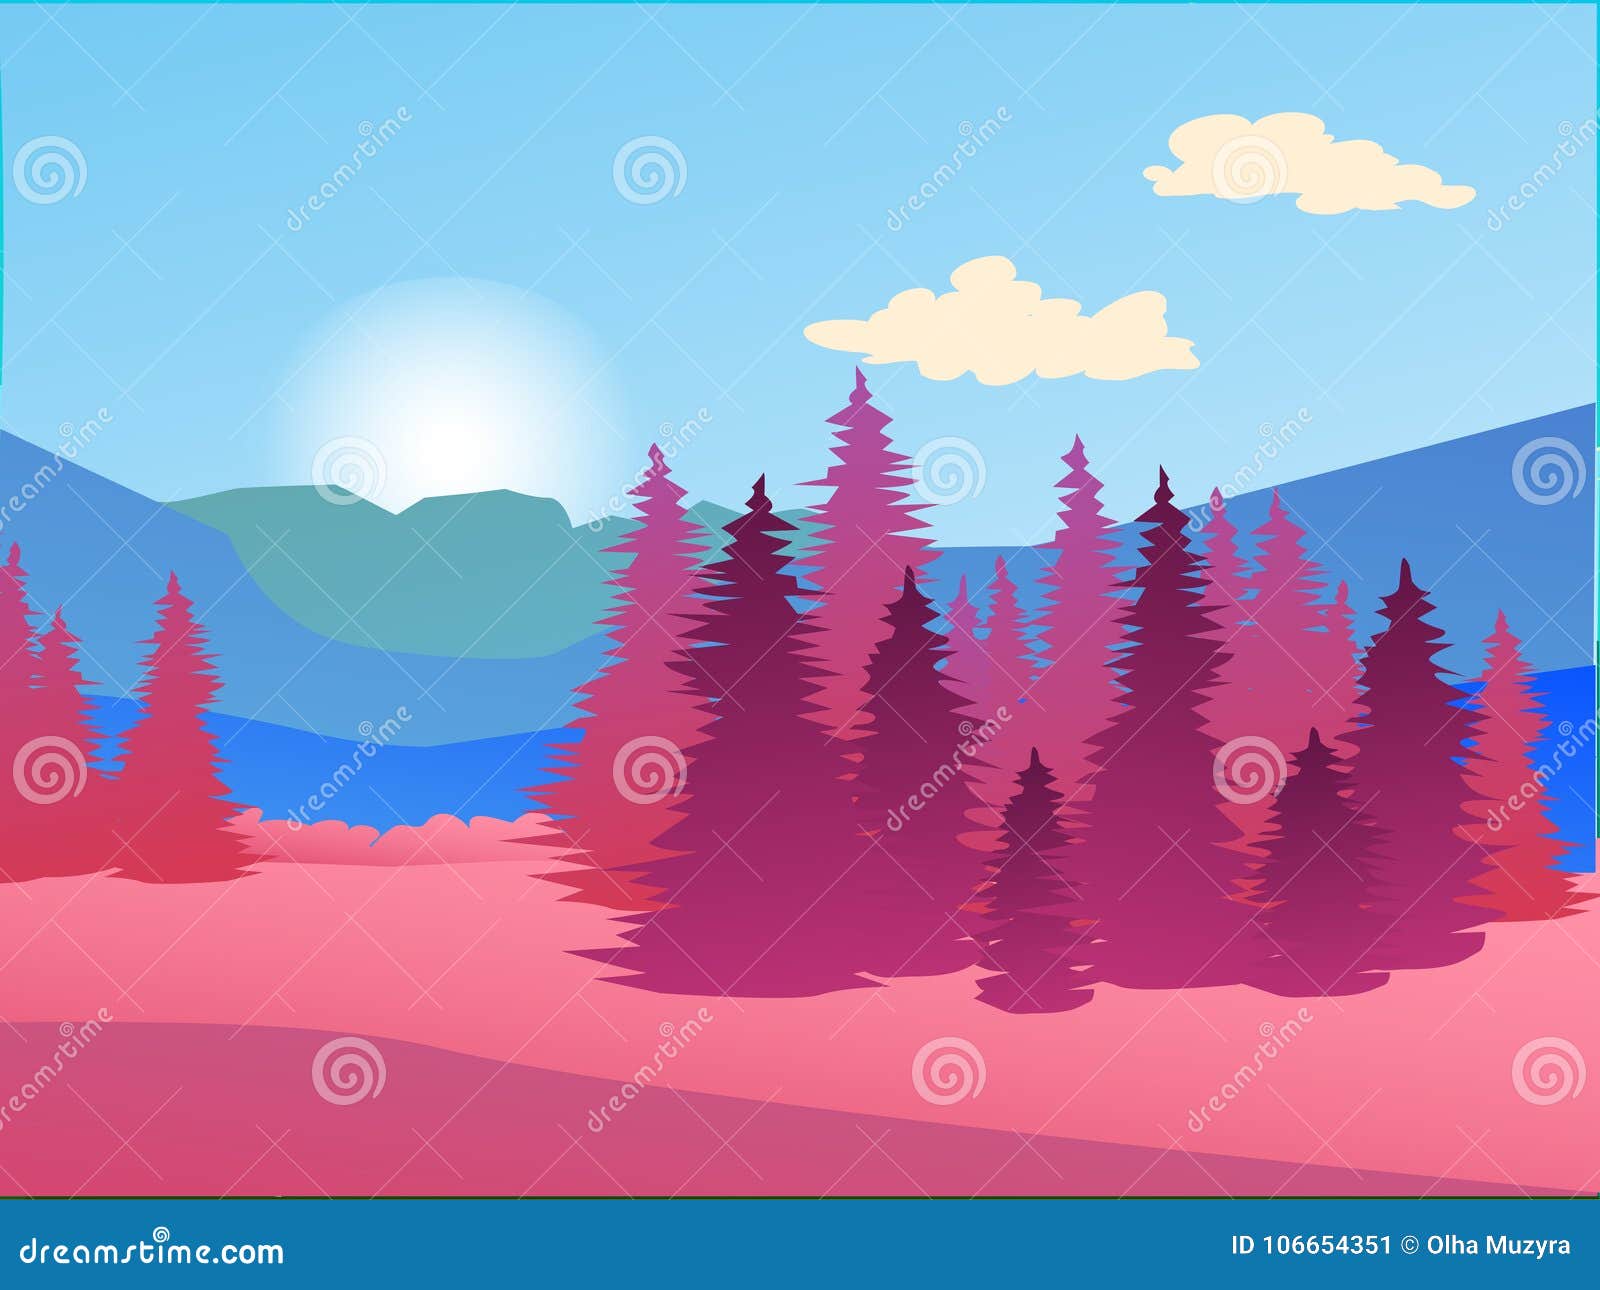  purple and blue background nature landsacape mountain and